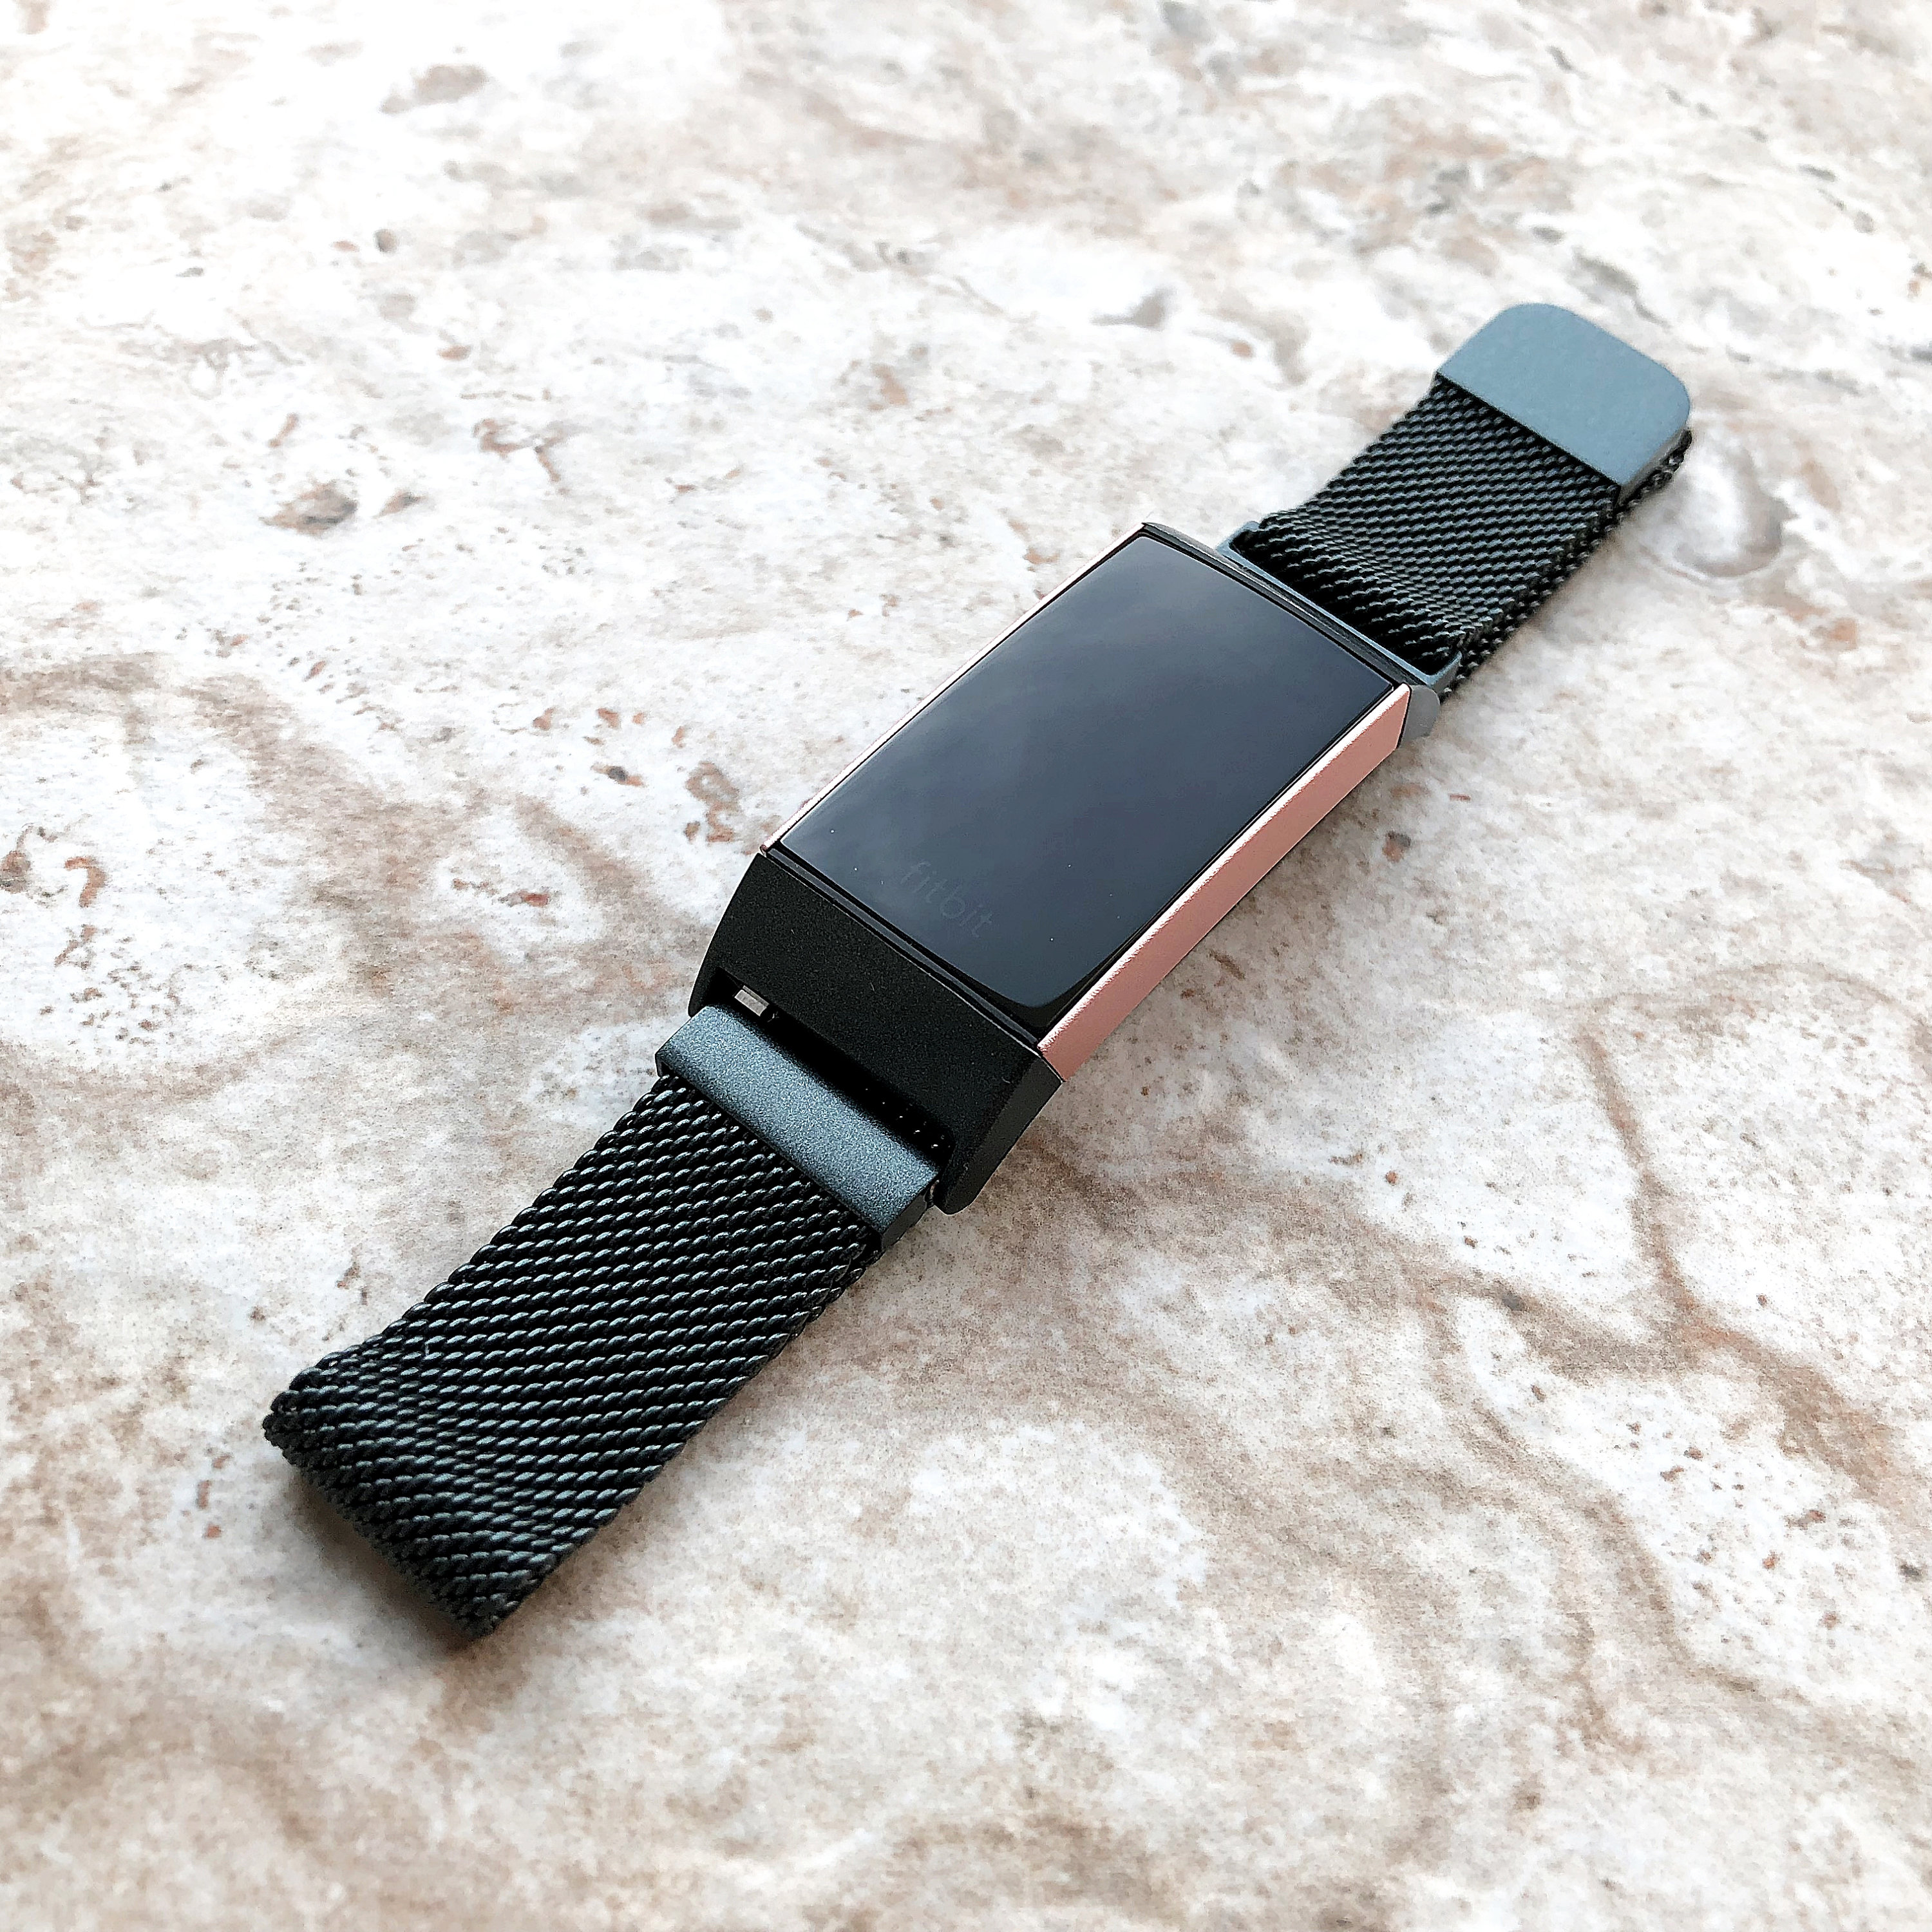 fitbit charge 3 mesh bands